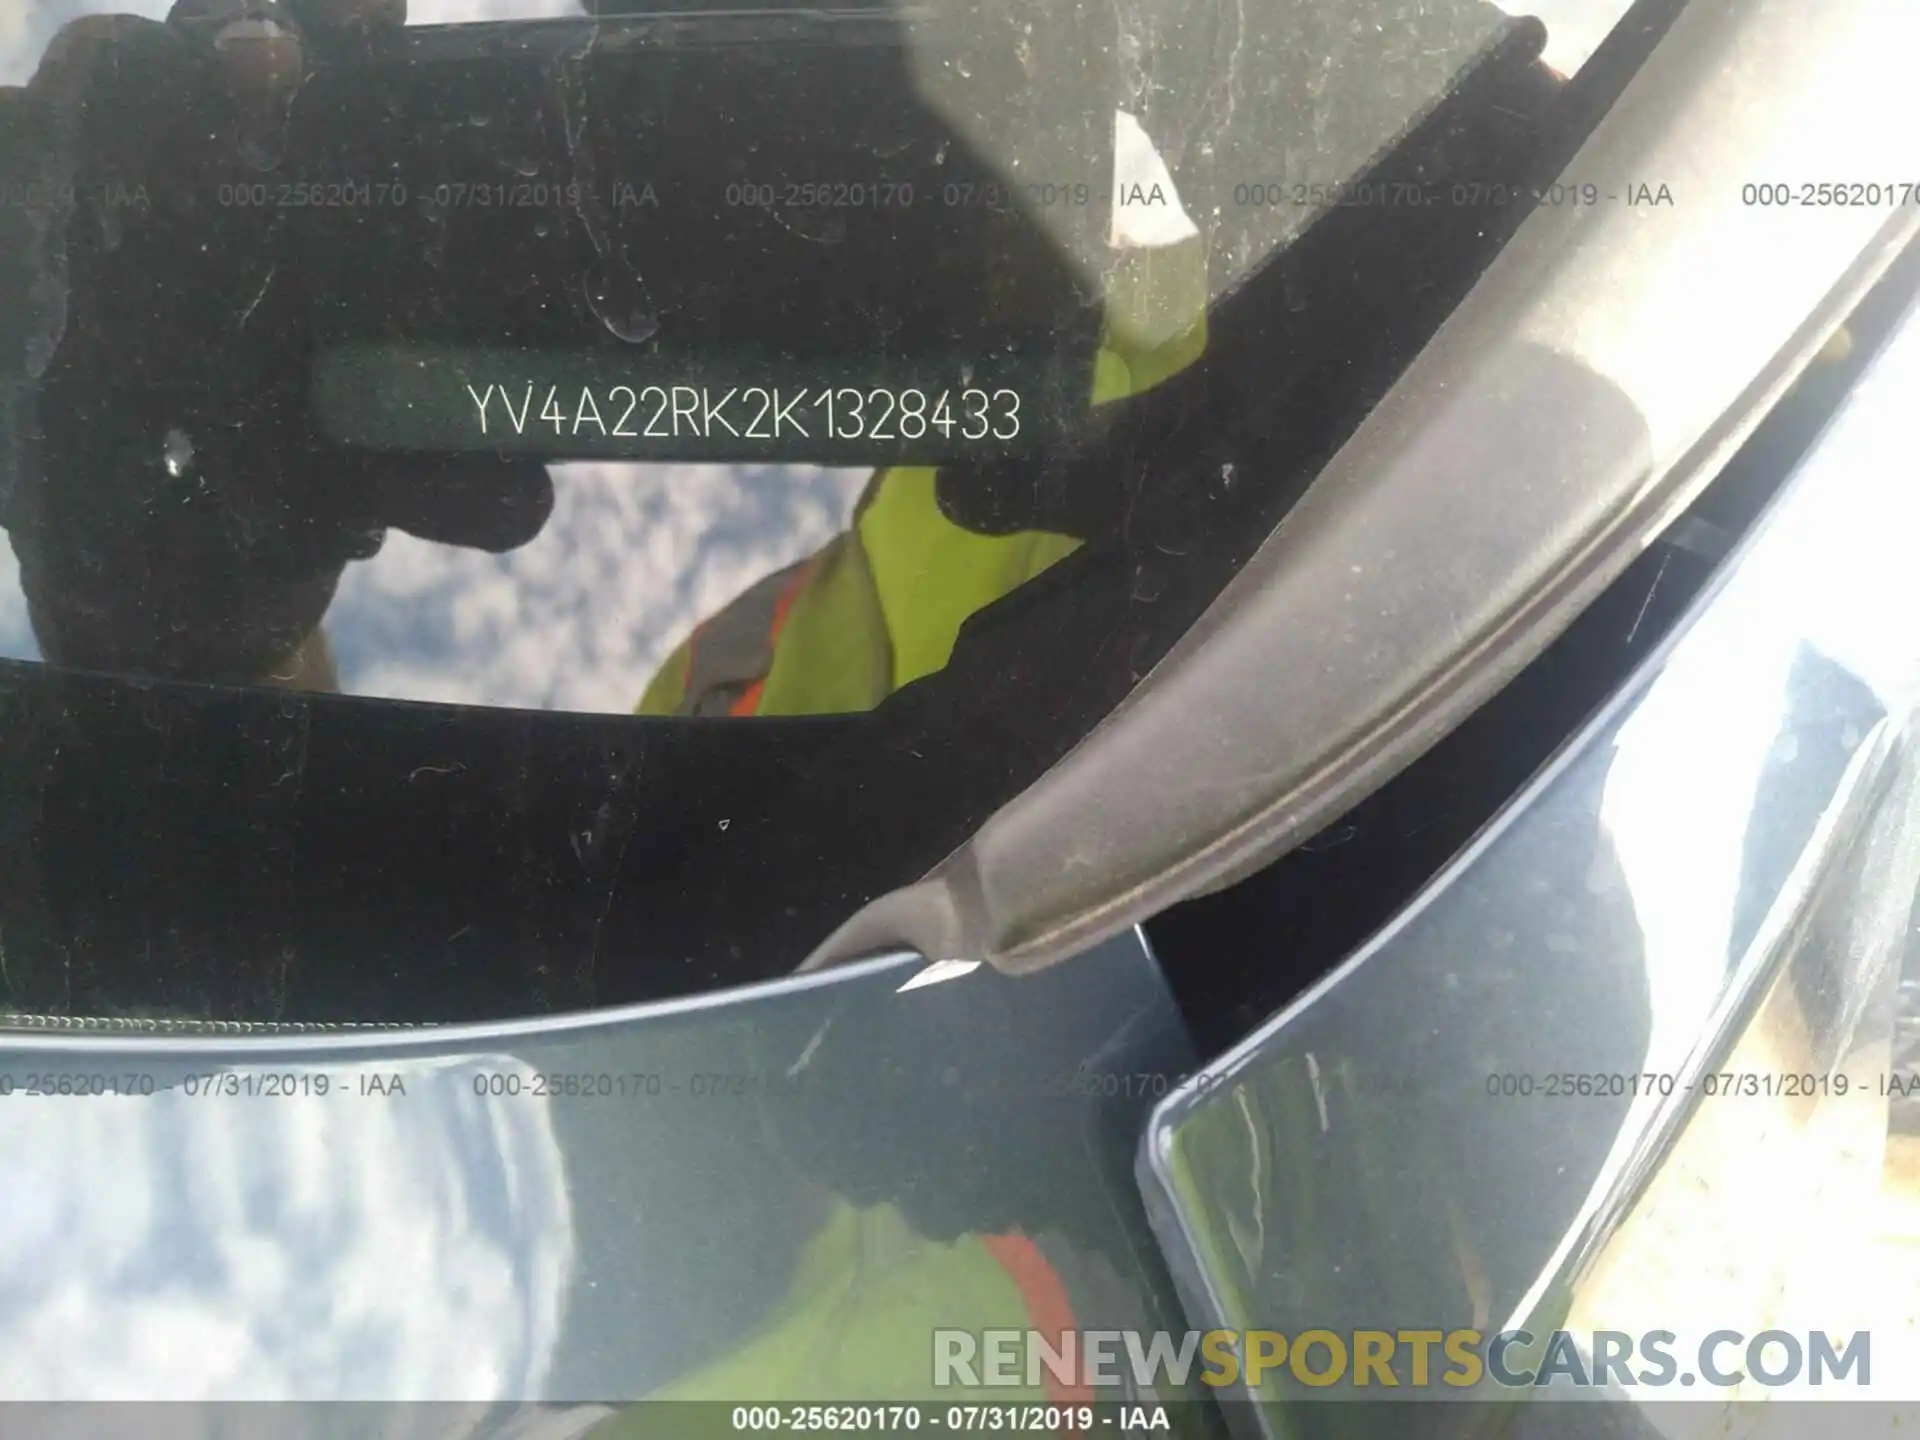 9 Photograph of a damaged car YV4A22RK2K1328433 VOLVO XC60 2019